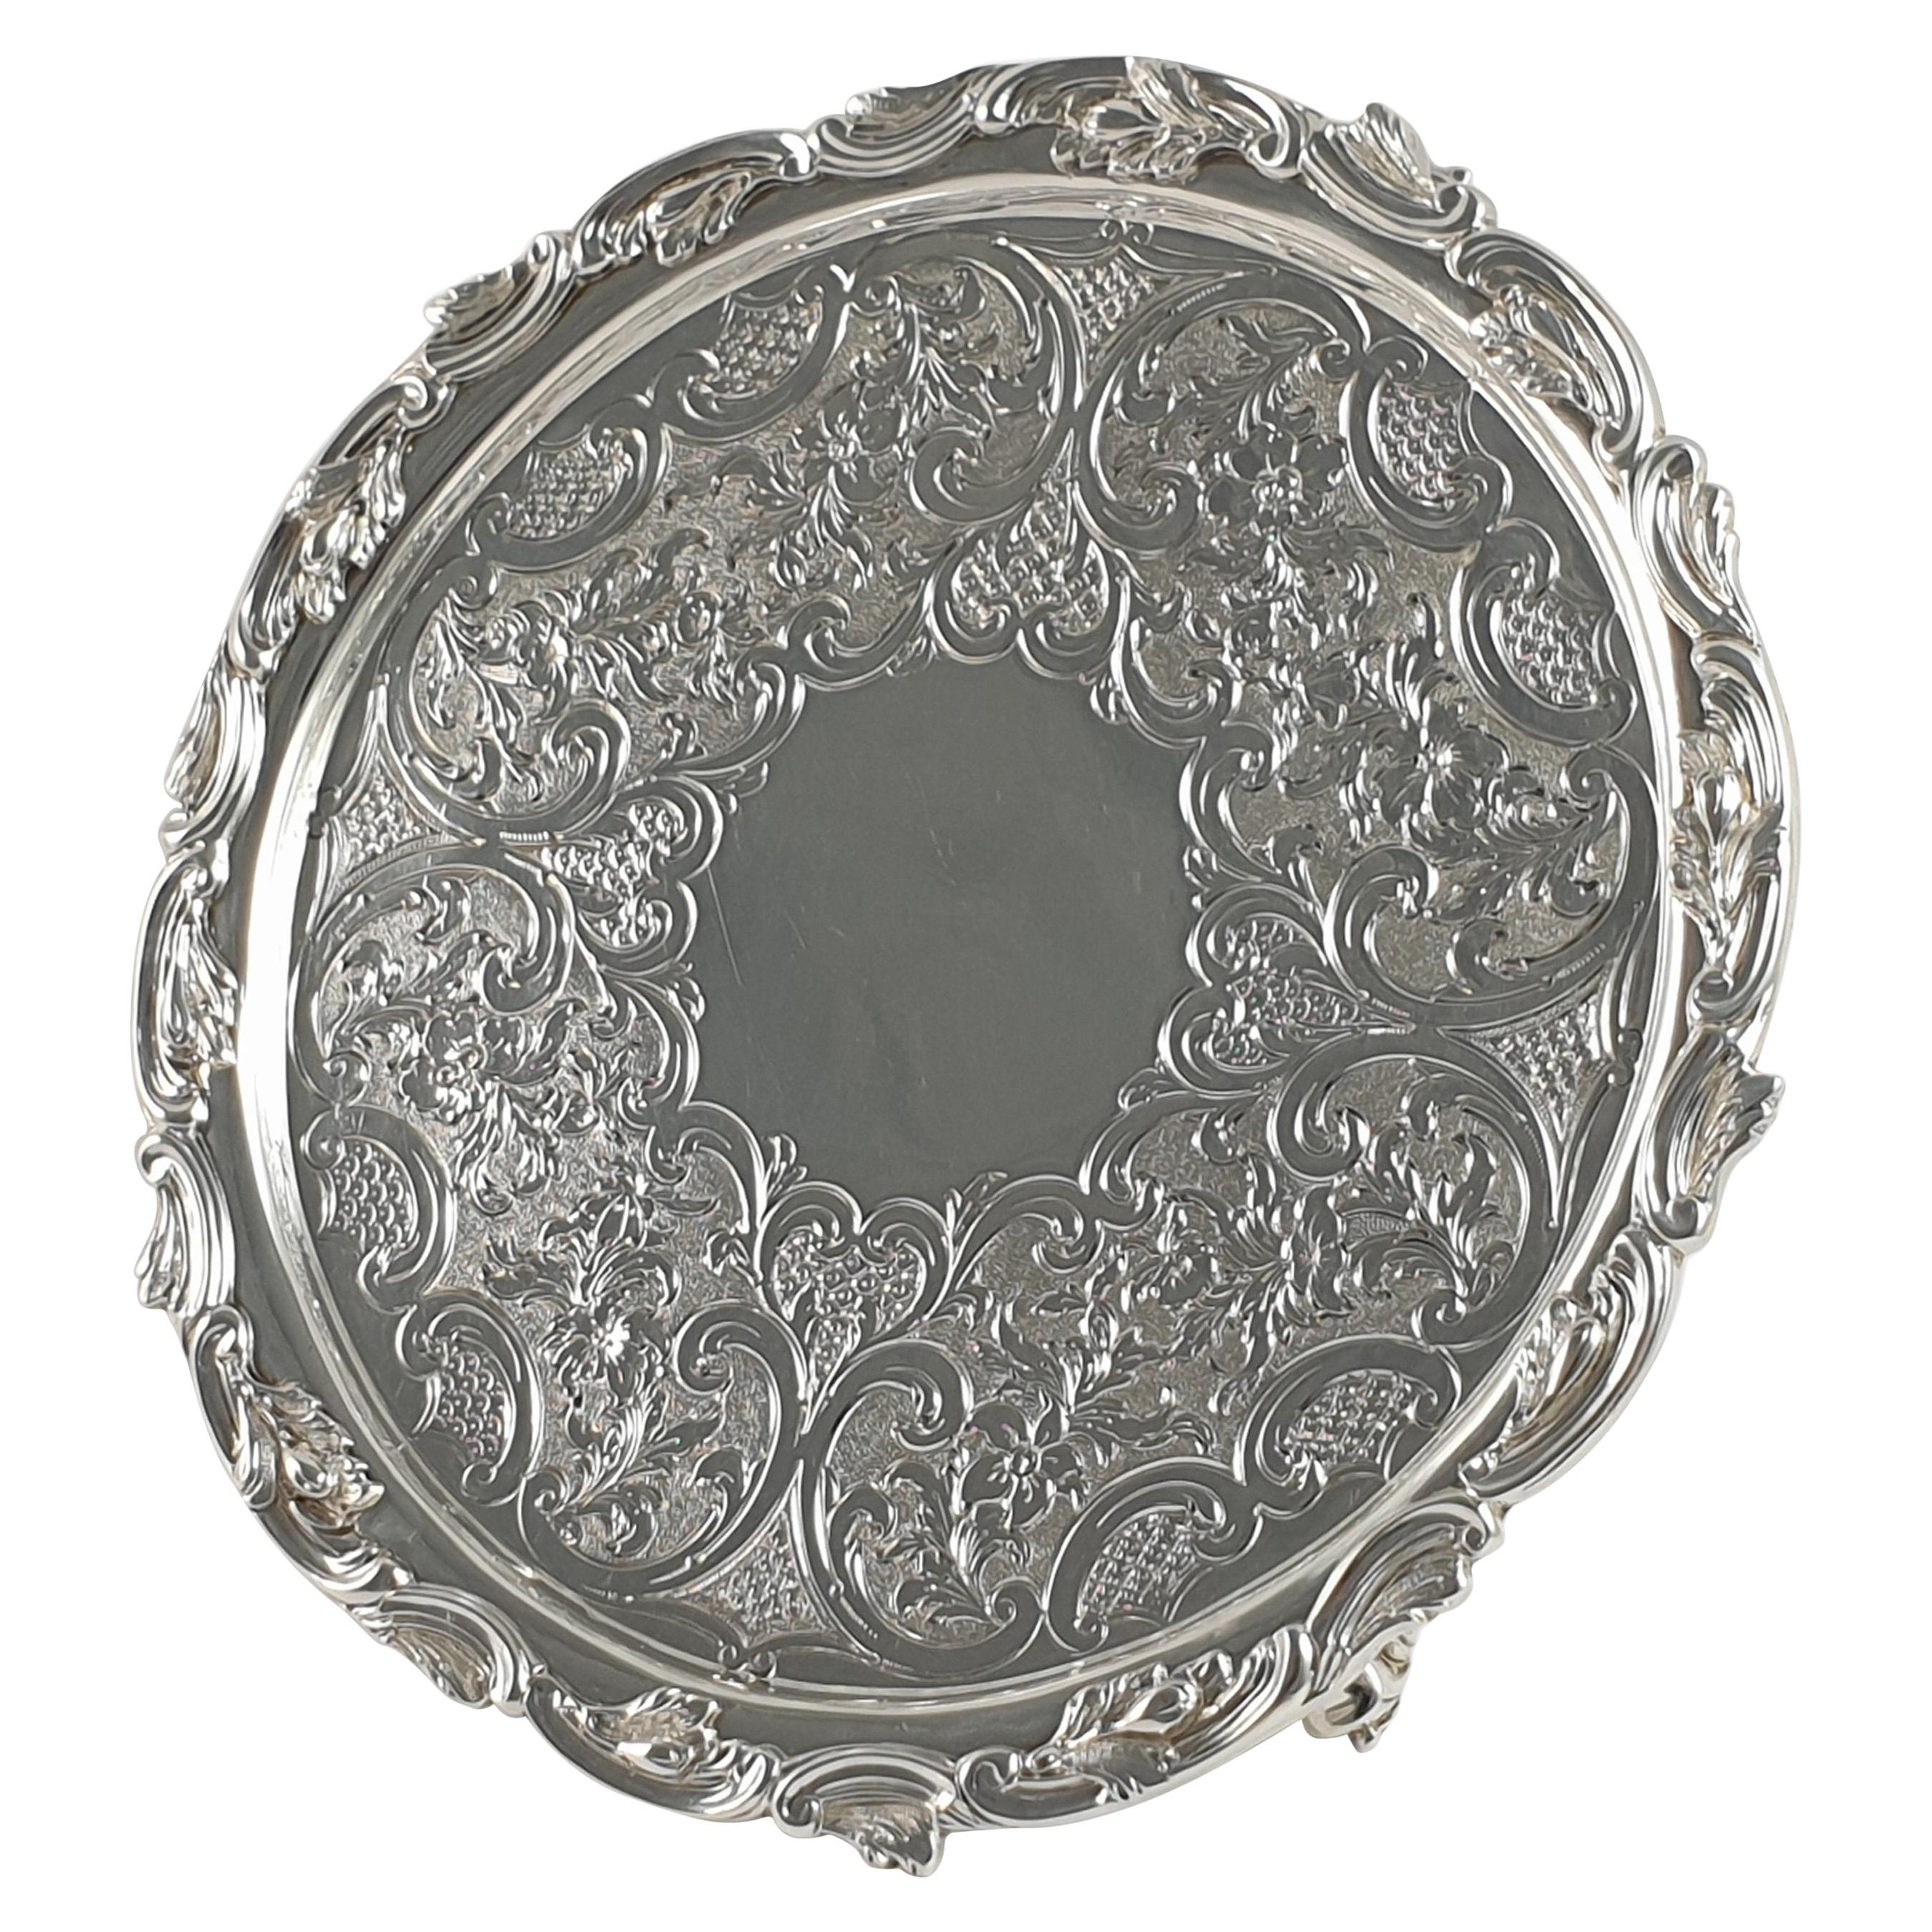 Scottish Victorian Sterling Silver Salver, Marshall & Sons